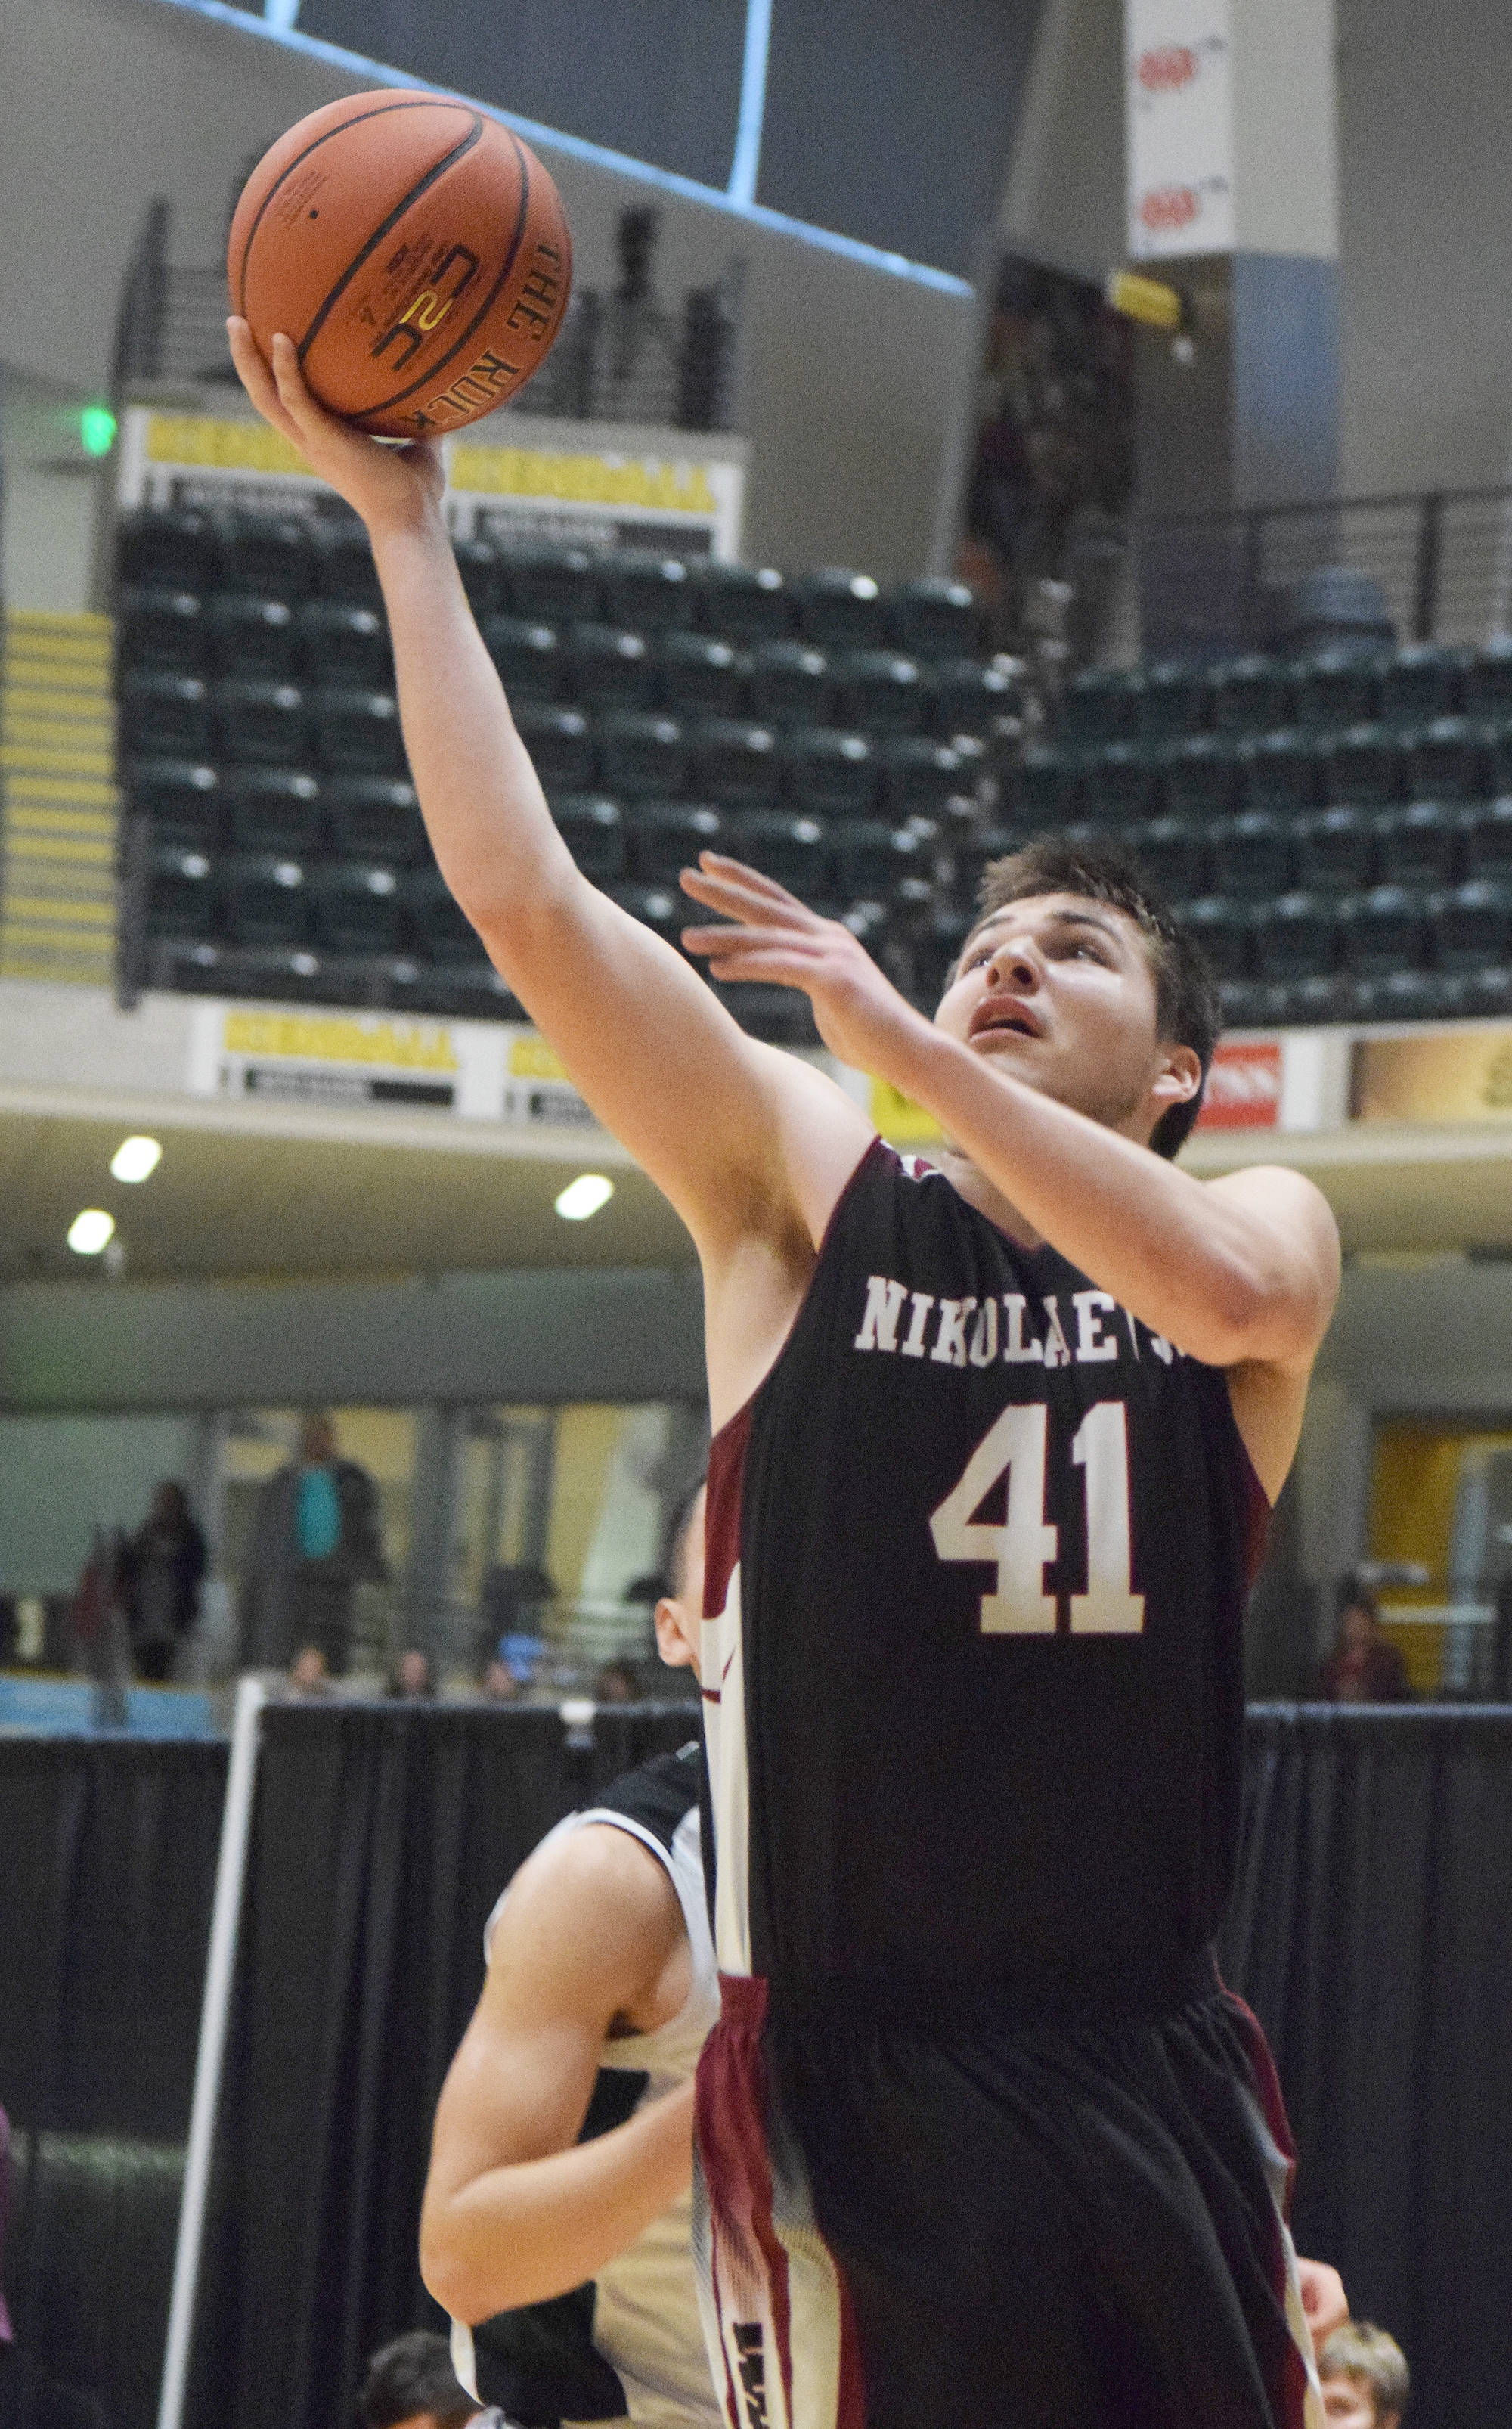 Nikolaevsk junior Michael Trail puts up a layup Friday in a Class 1A state tournament fourth-place semifinal contest against Shishmaref at the Alaska Airlines Center. (Photo by Joey Klecka/Peninsula Clarion)